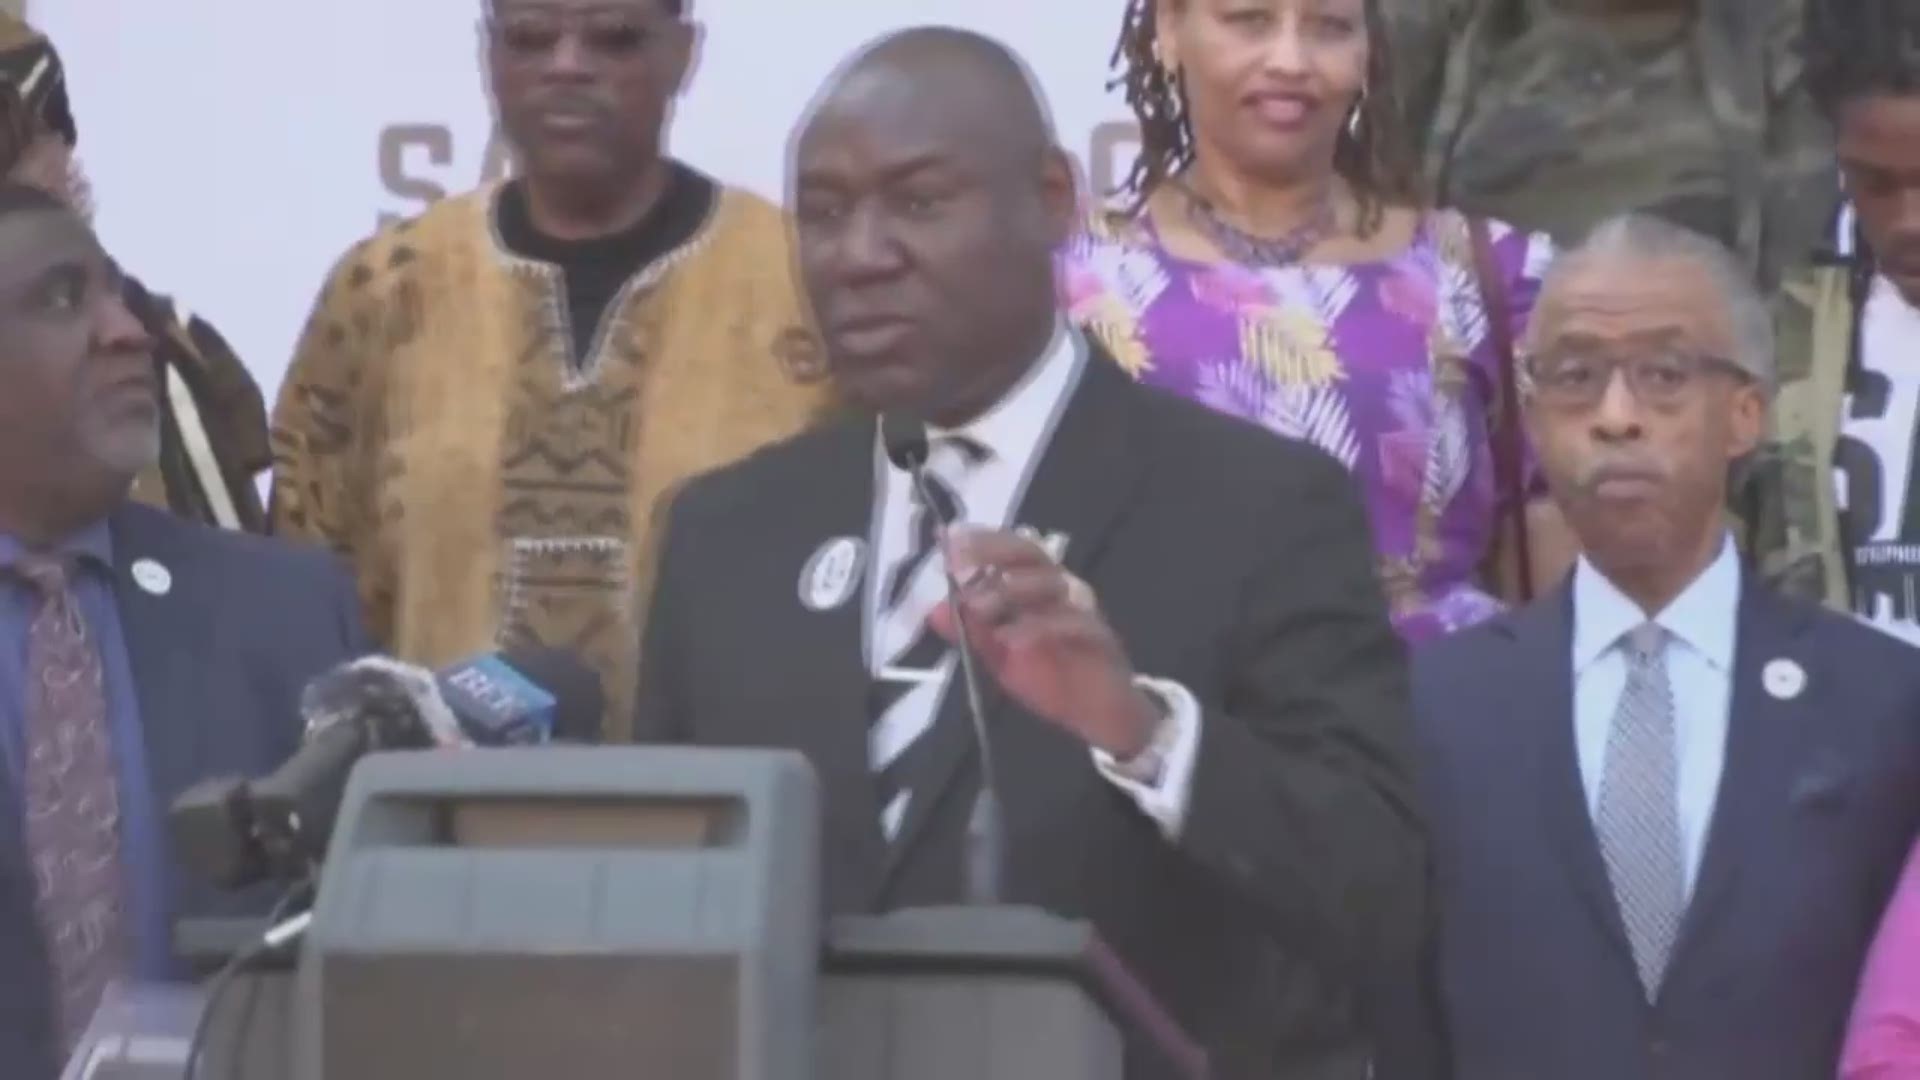 Stephon Clark's family, Rev. Al Sharpton and Attorney Ben Crump hold a press conference marking one year since Clark was fatally shot by Sacramento Police officers.